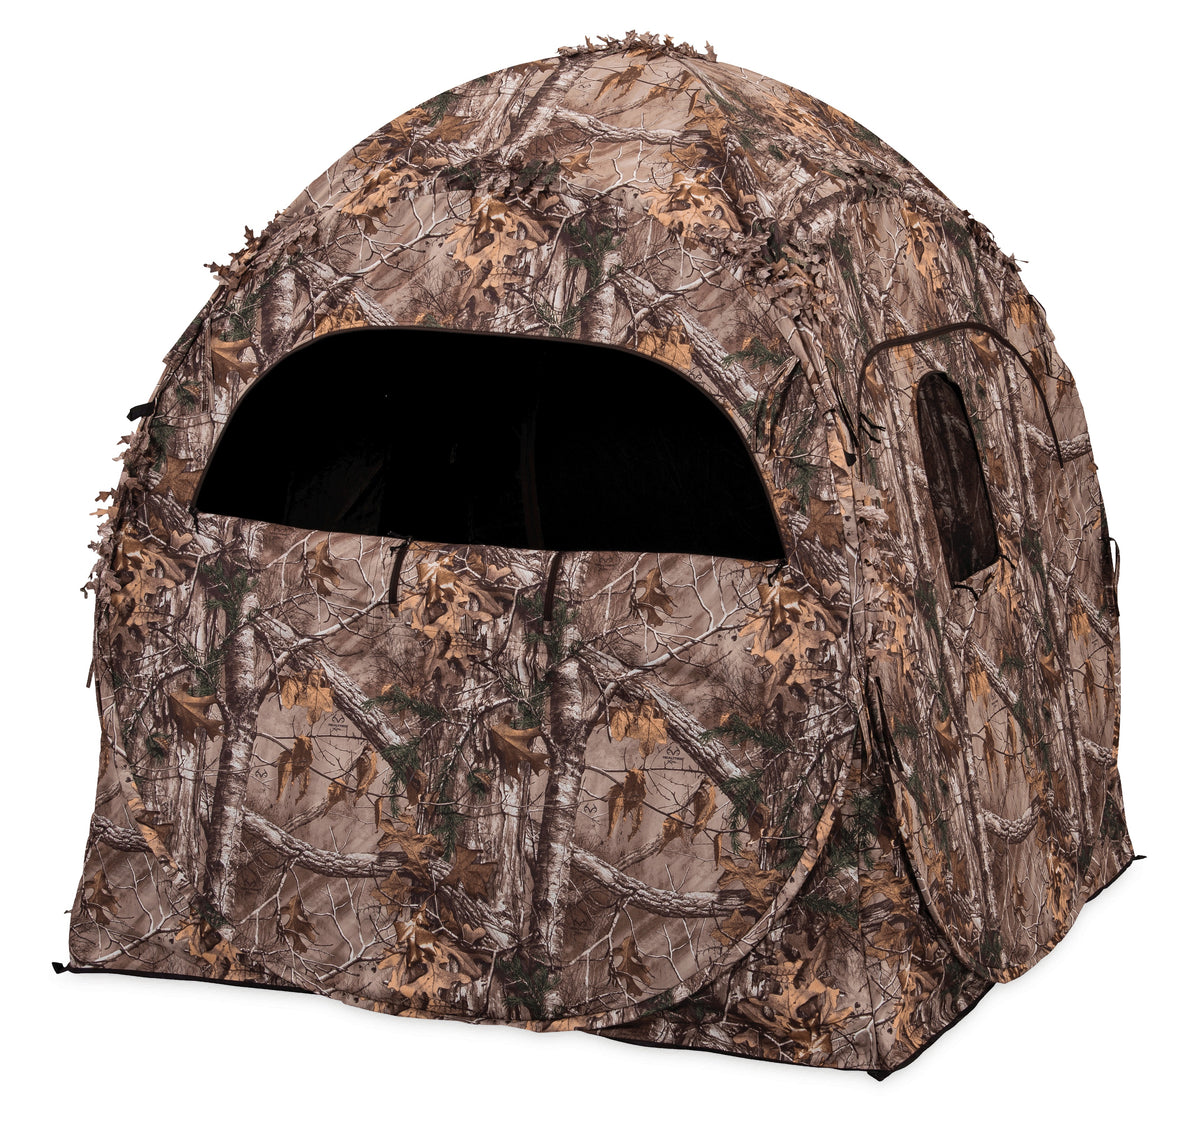 buy hunting accessories at cheap rate in bulk. wholesale & retail bulk camping supplies store.